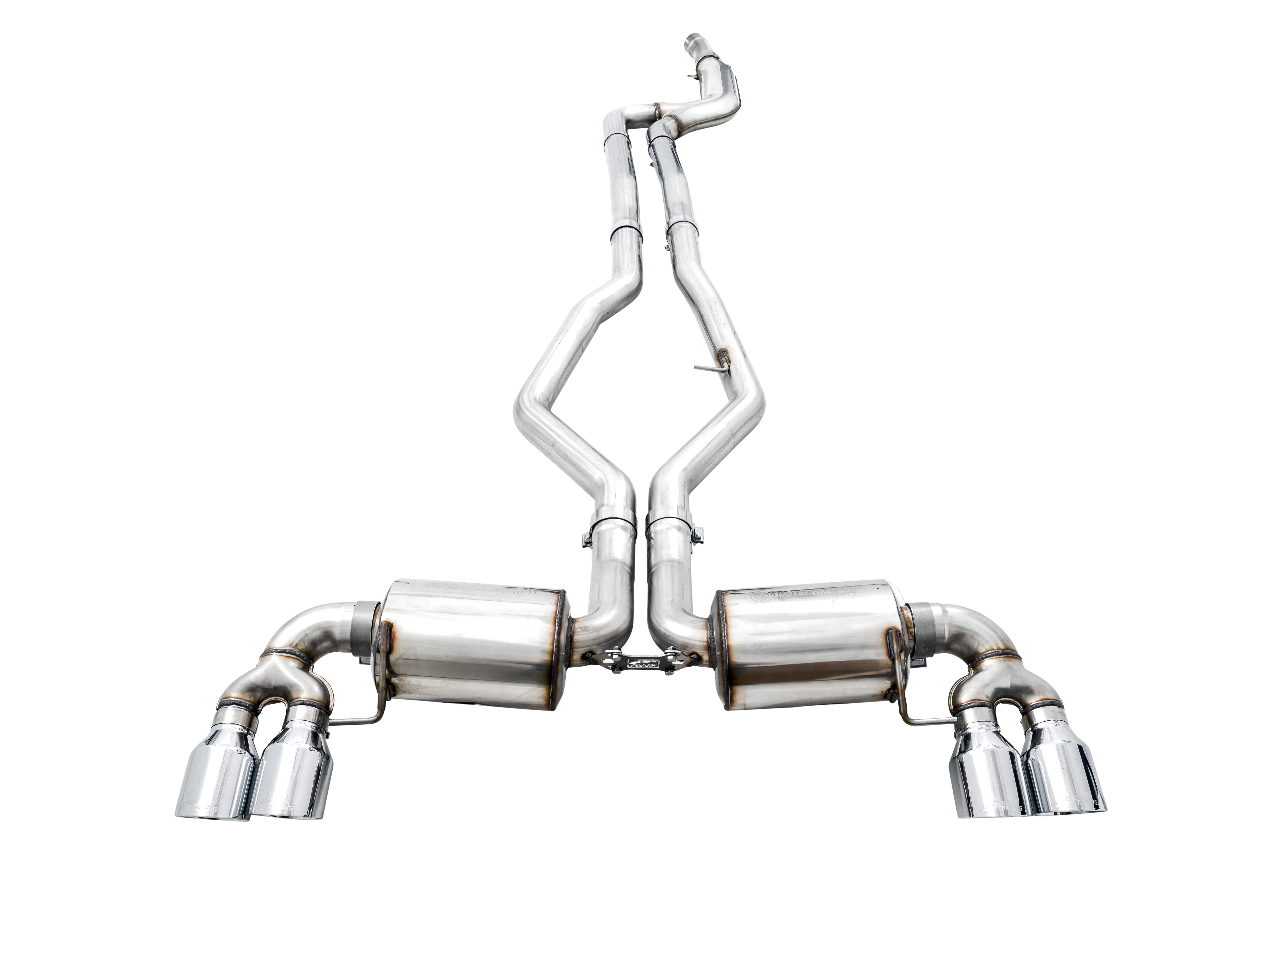 AWE Non-Resonated Touring Edition Exhaust for G2X M340i - M440i - Chrome Silver Tips